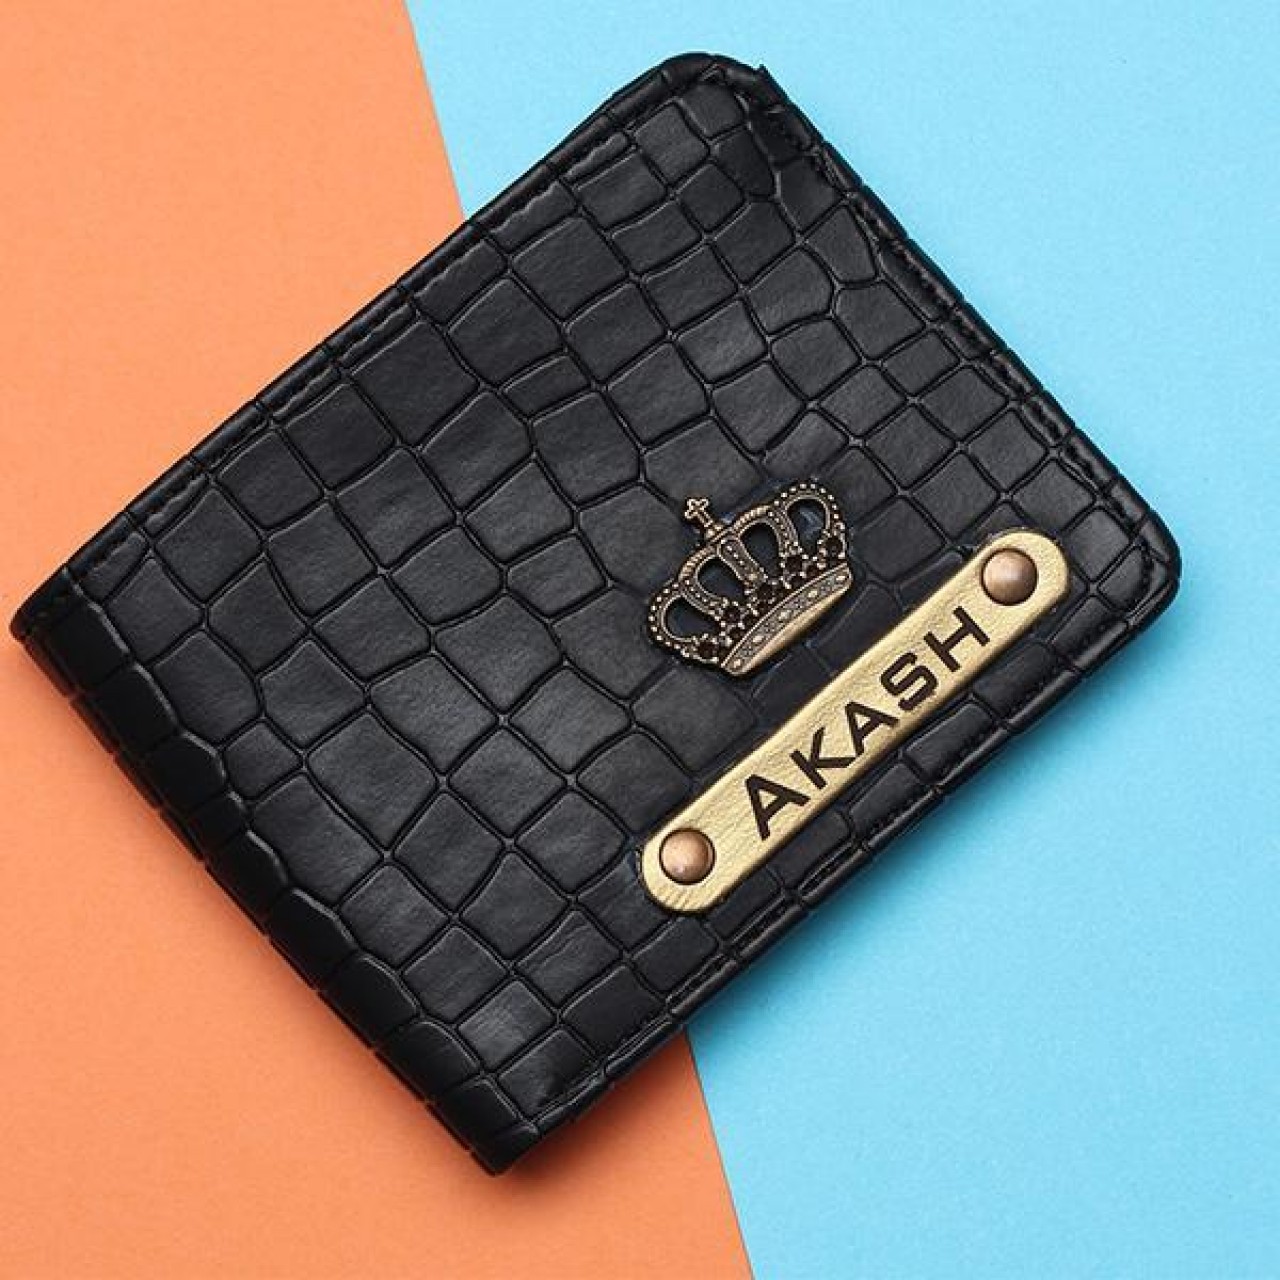 Personalized Brick Men's Wallet With Charm